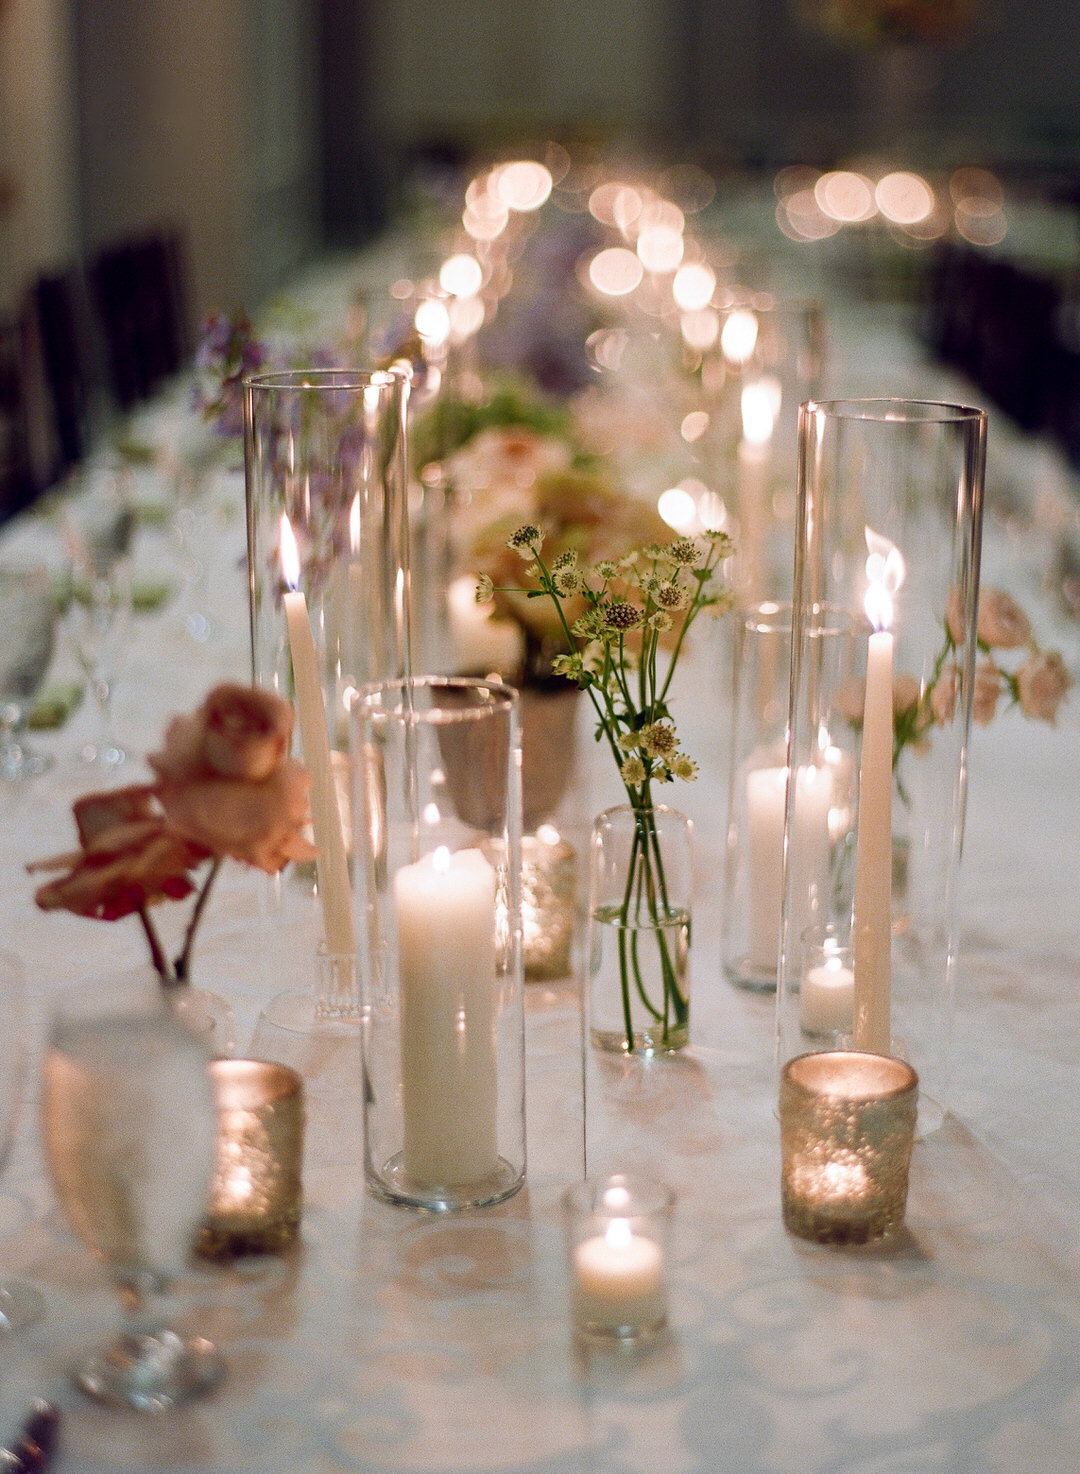 Wedding Reception table filled with flowers and candles